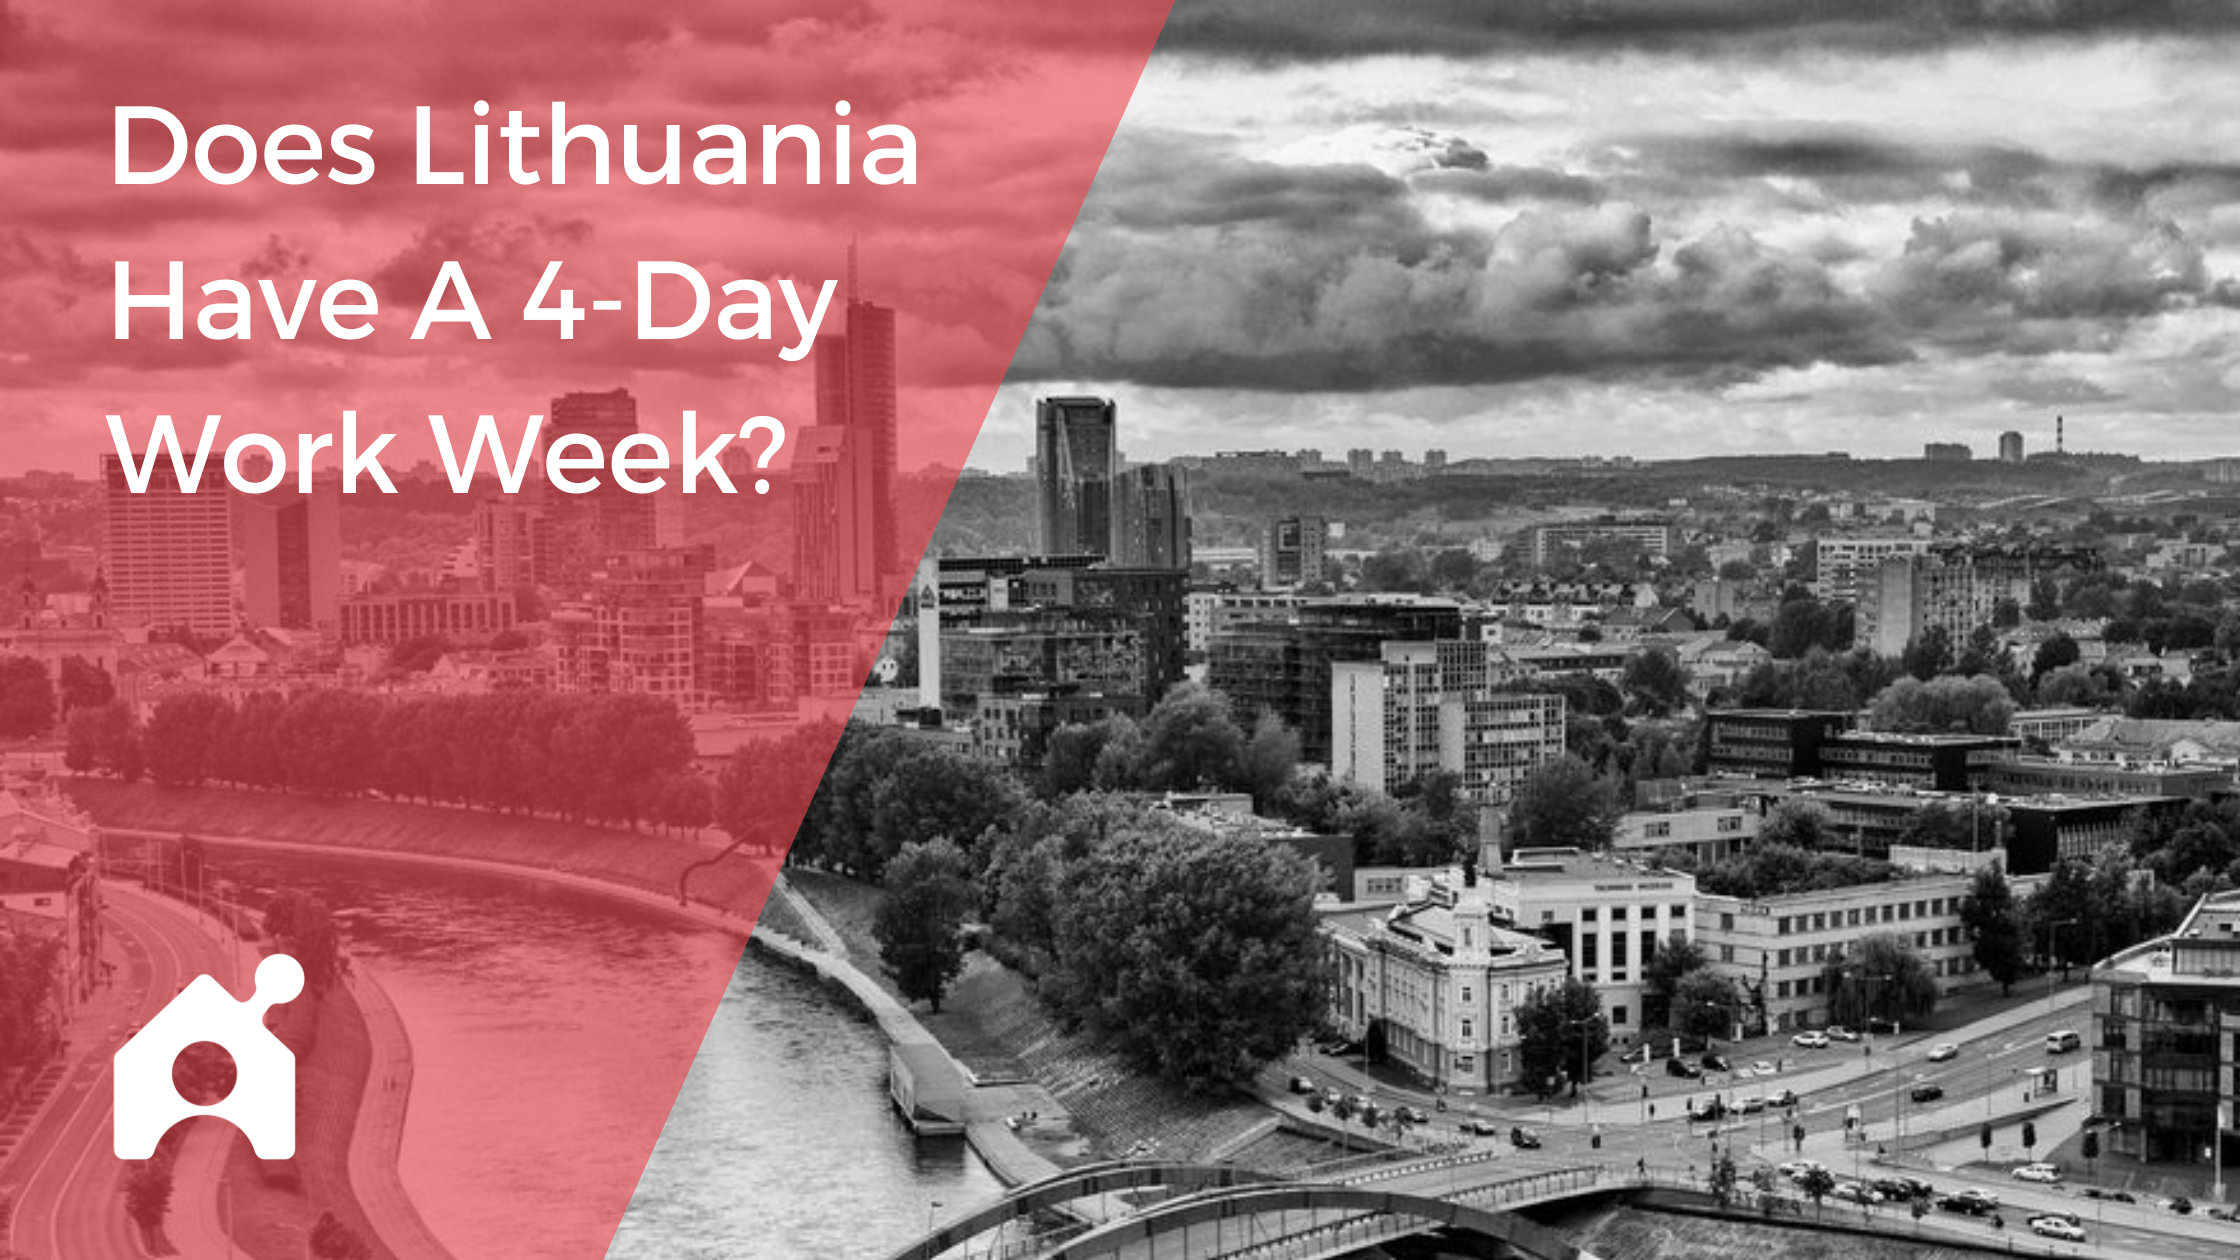 Lithuania 4-day work week